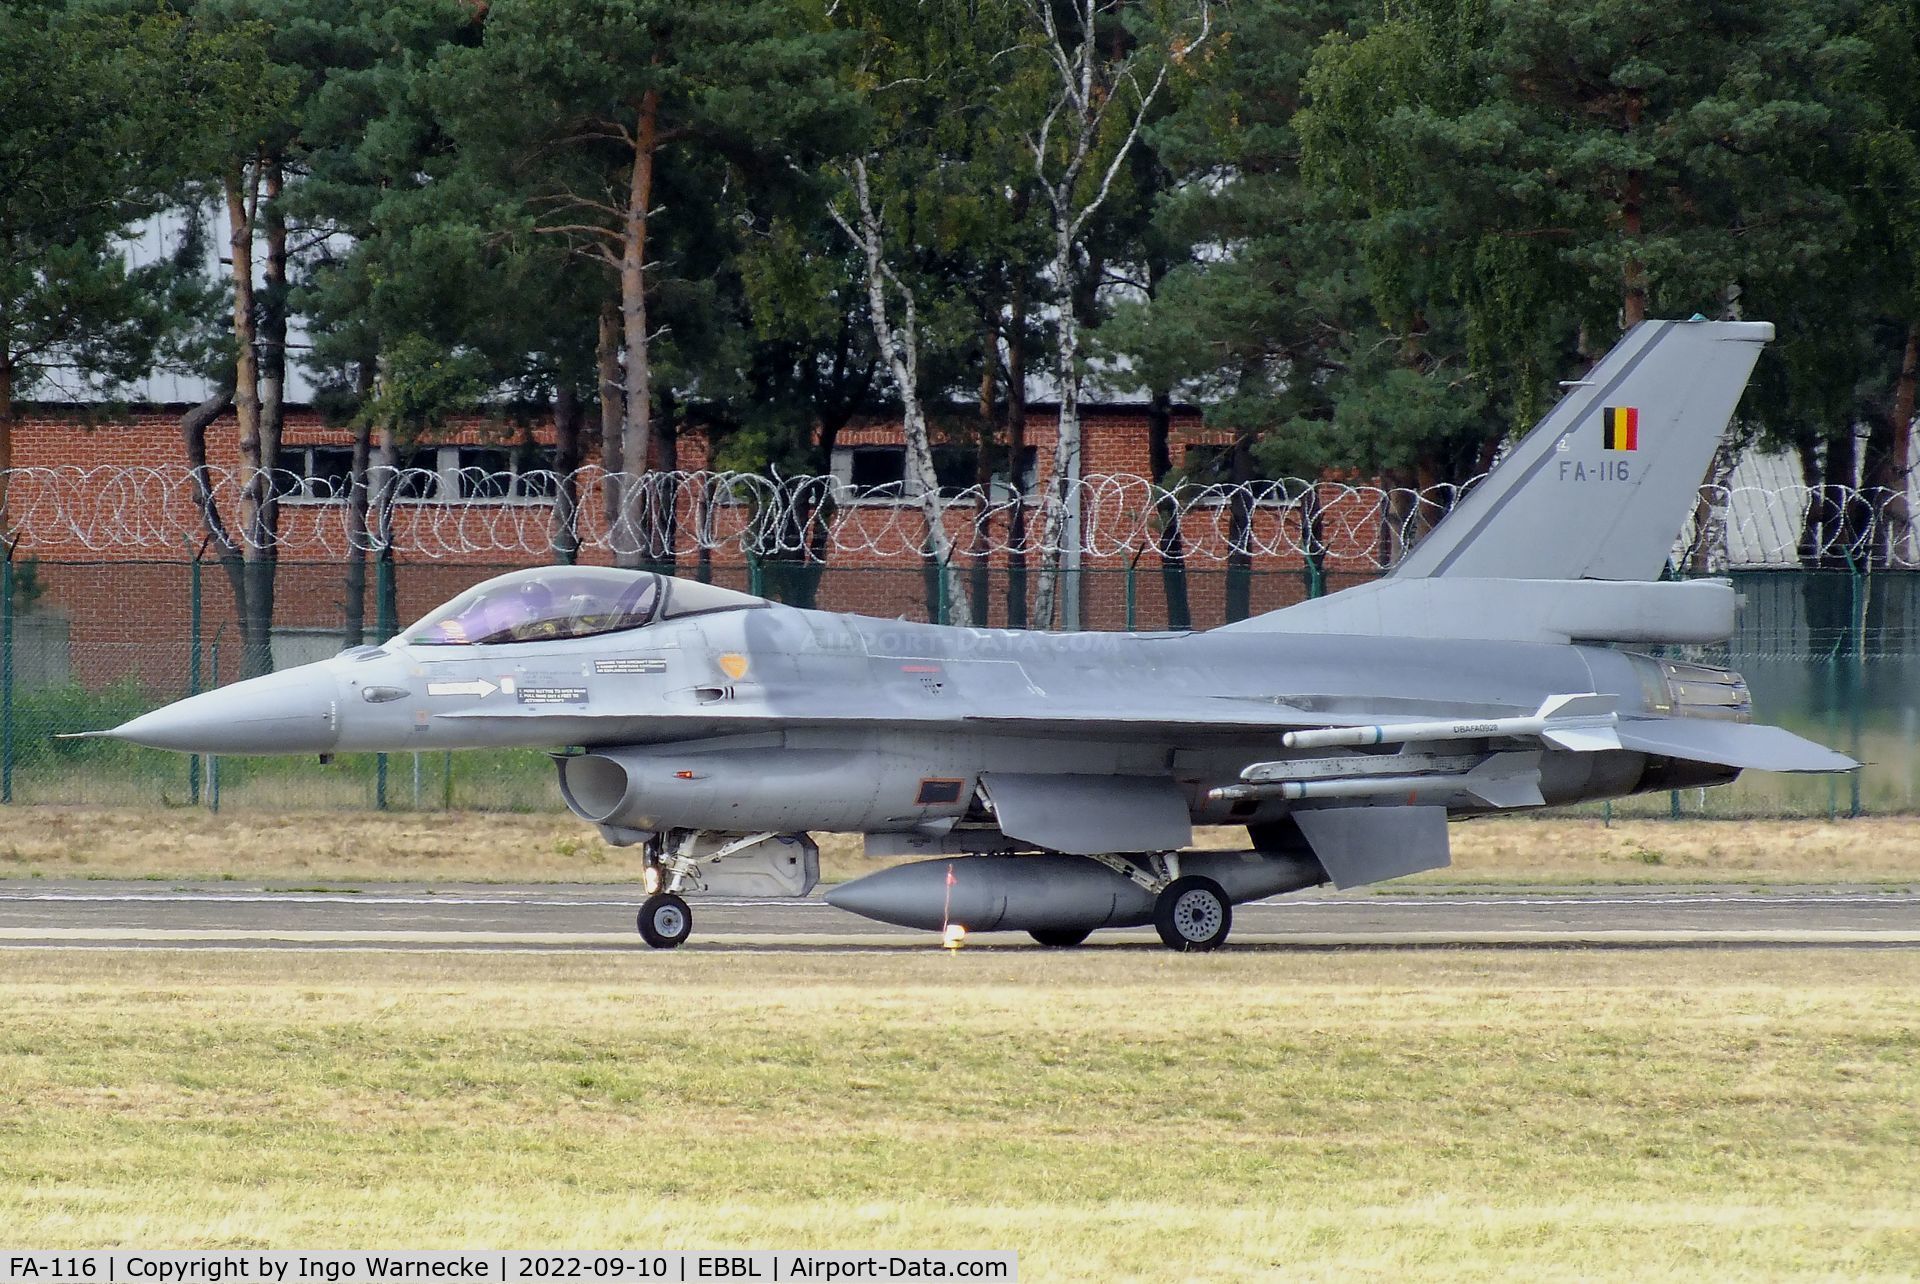 FA-116, 1980 SABCA F-16AM Fighting Falcon C/N 6H-116, General Dynamics (SABCA) F-16AM Fighting Falcon of the FAeB (Belgian air force) at the 2022 Sanicole Spottersday at Kleine Brogel air base